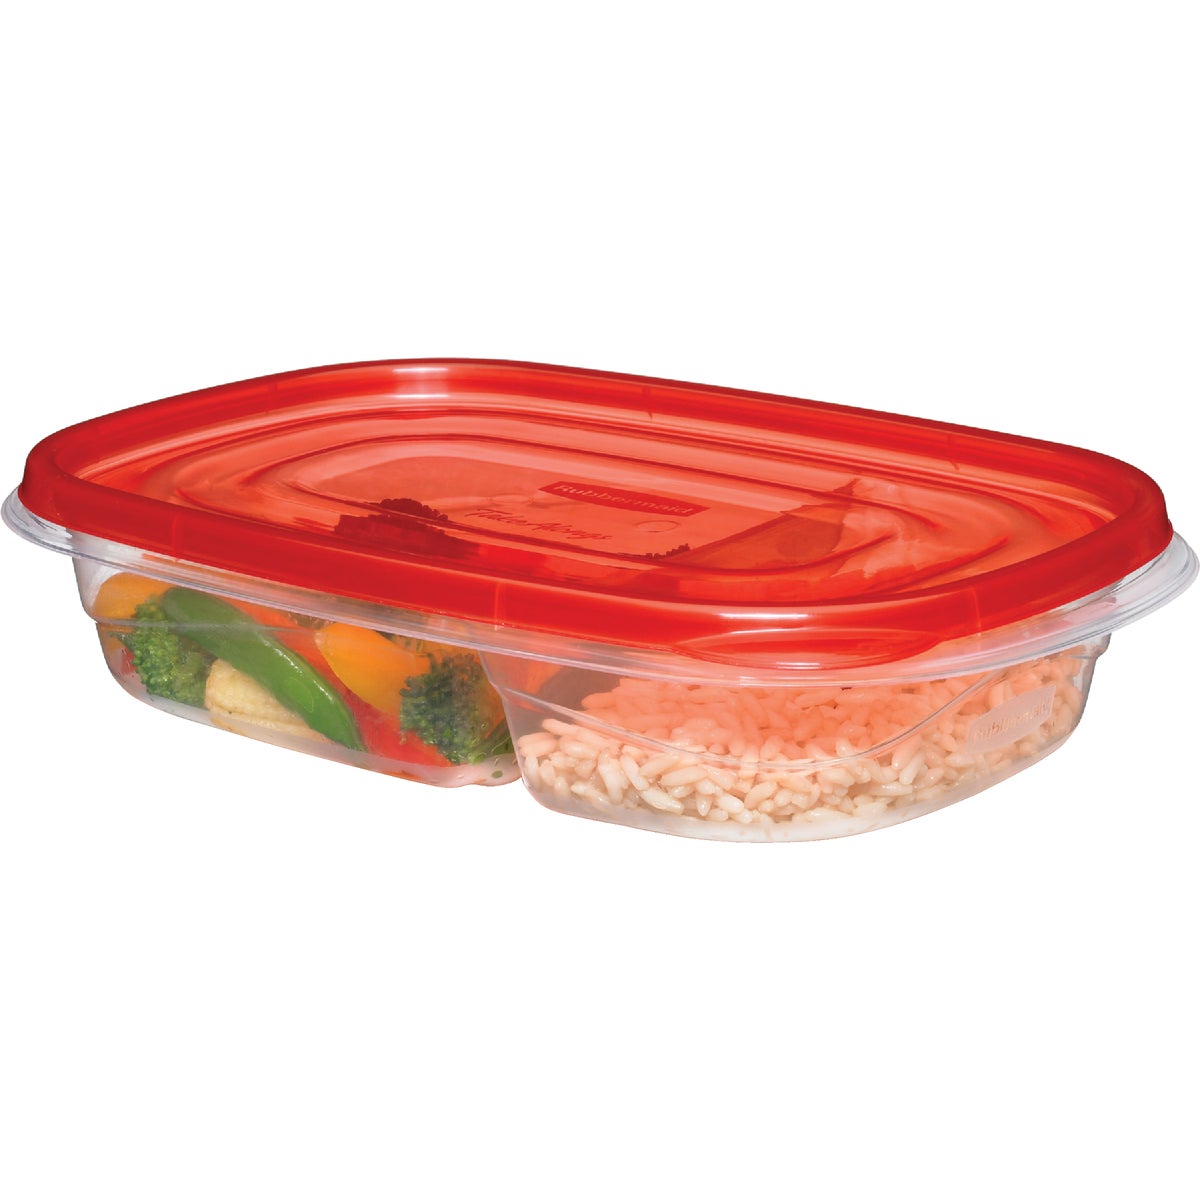 Rubbermaid TakeAlongs 3.7 C. Clear Square Divided Food Storage Container with Lids (3-Pack)